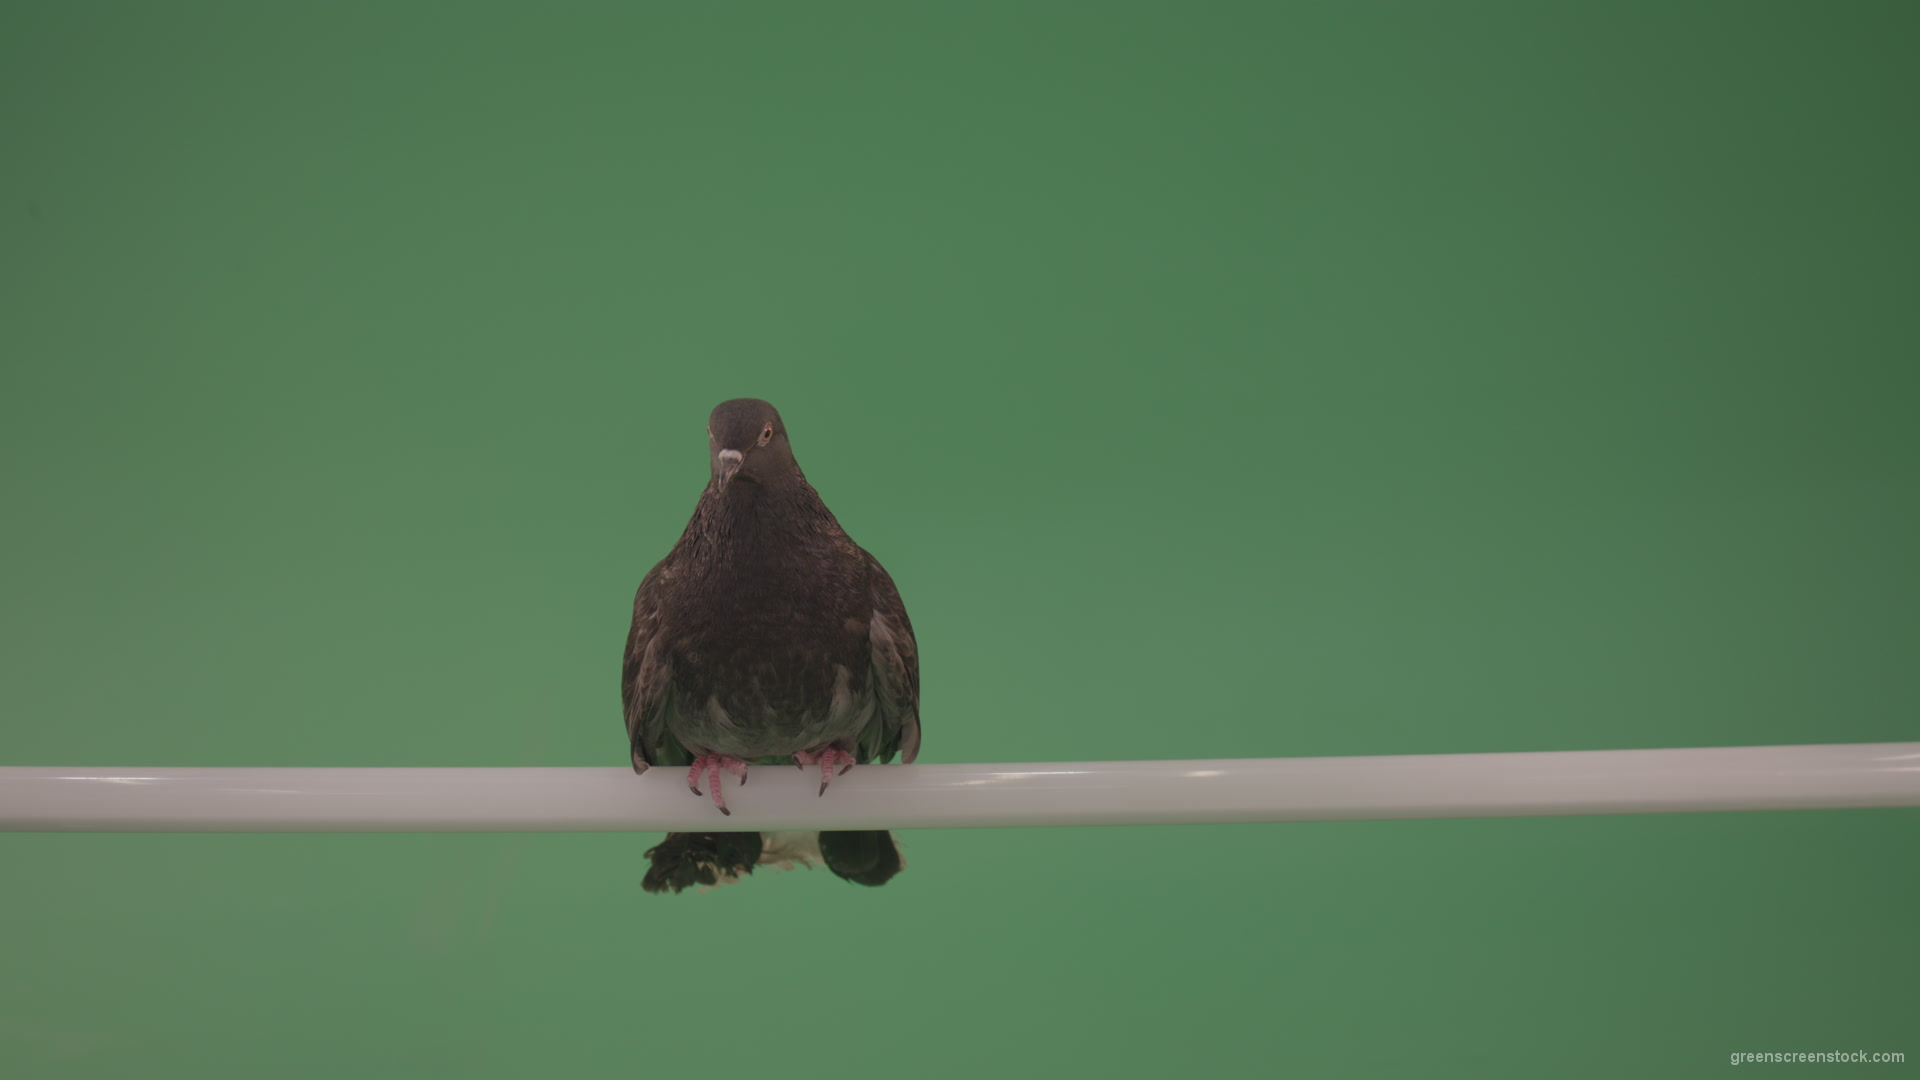 Dove-sitting-on-a-branch-in-the-city-isolated-in-green-screen-studio_007 Green Screen Stock